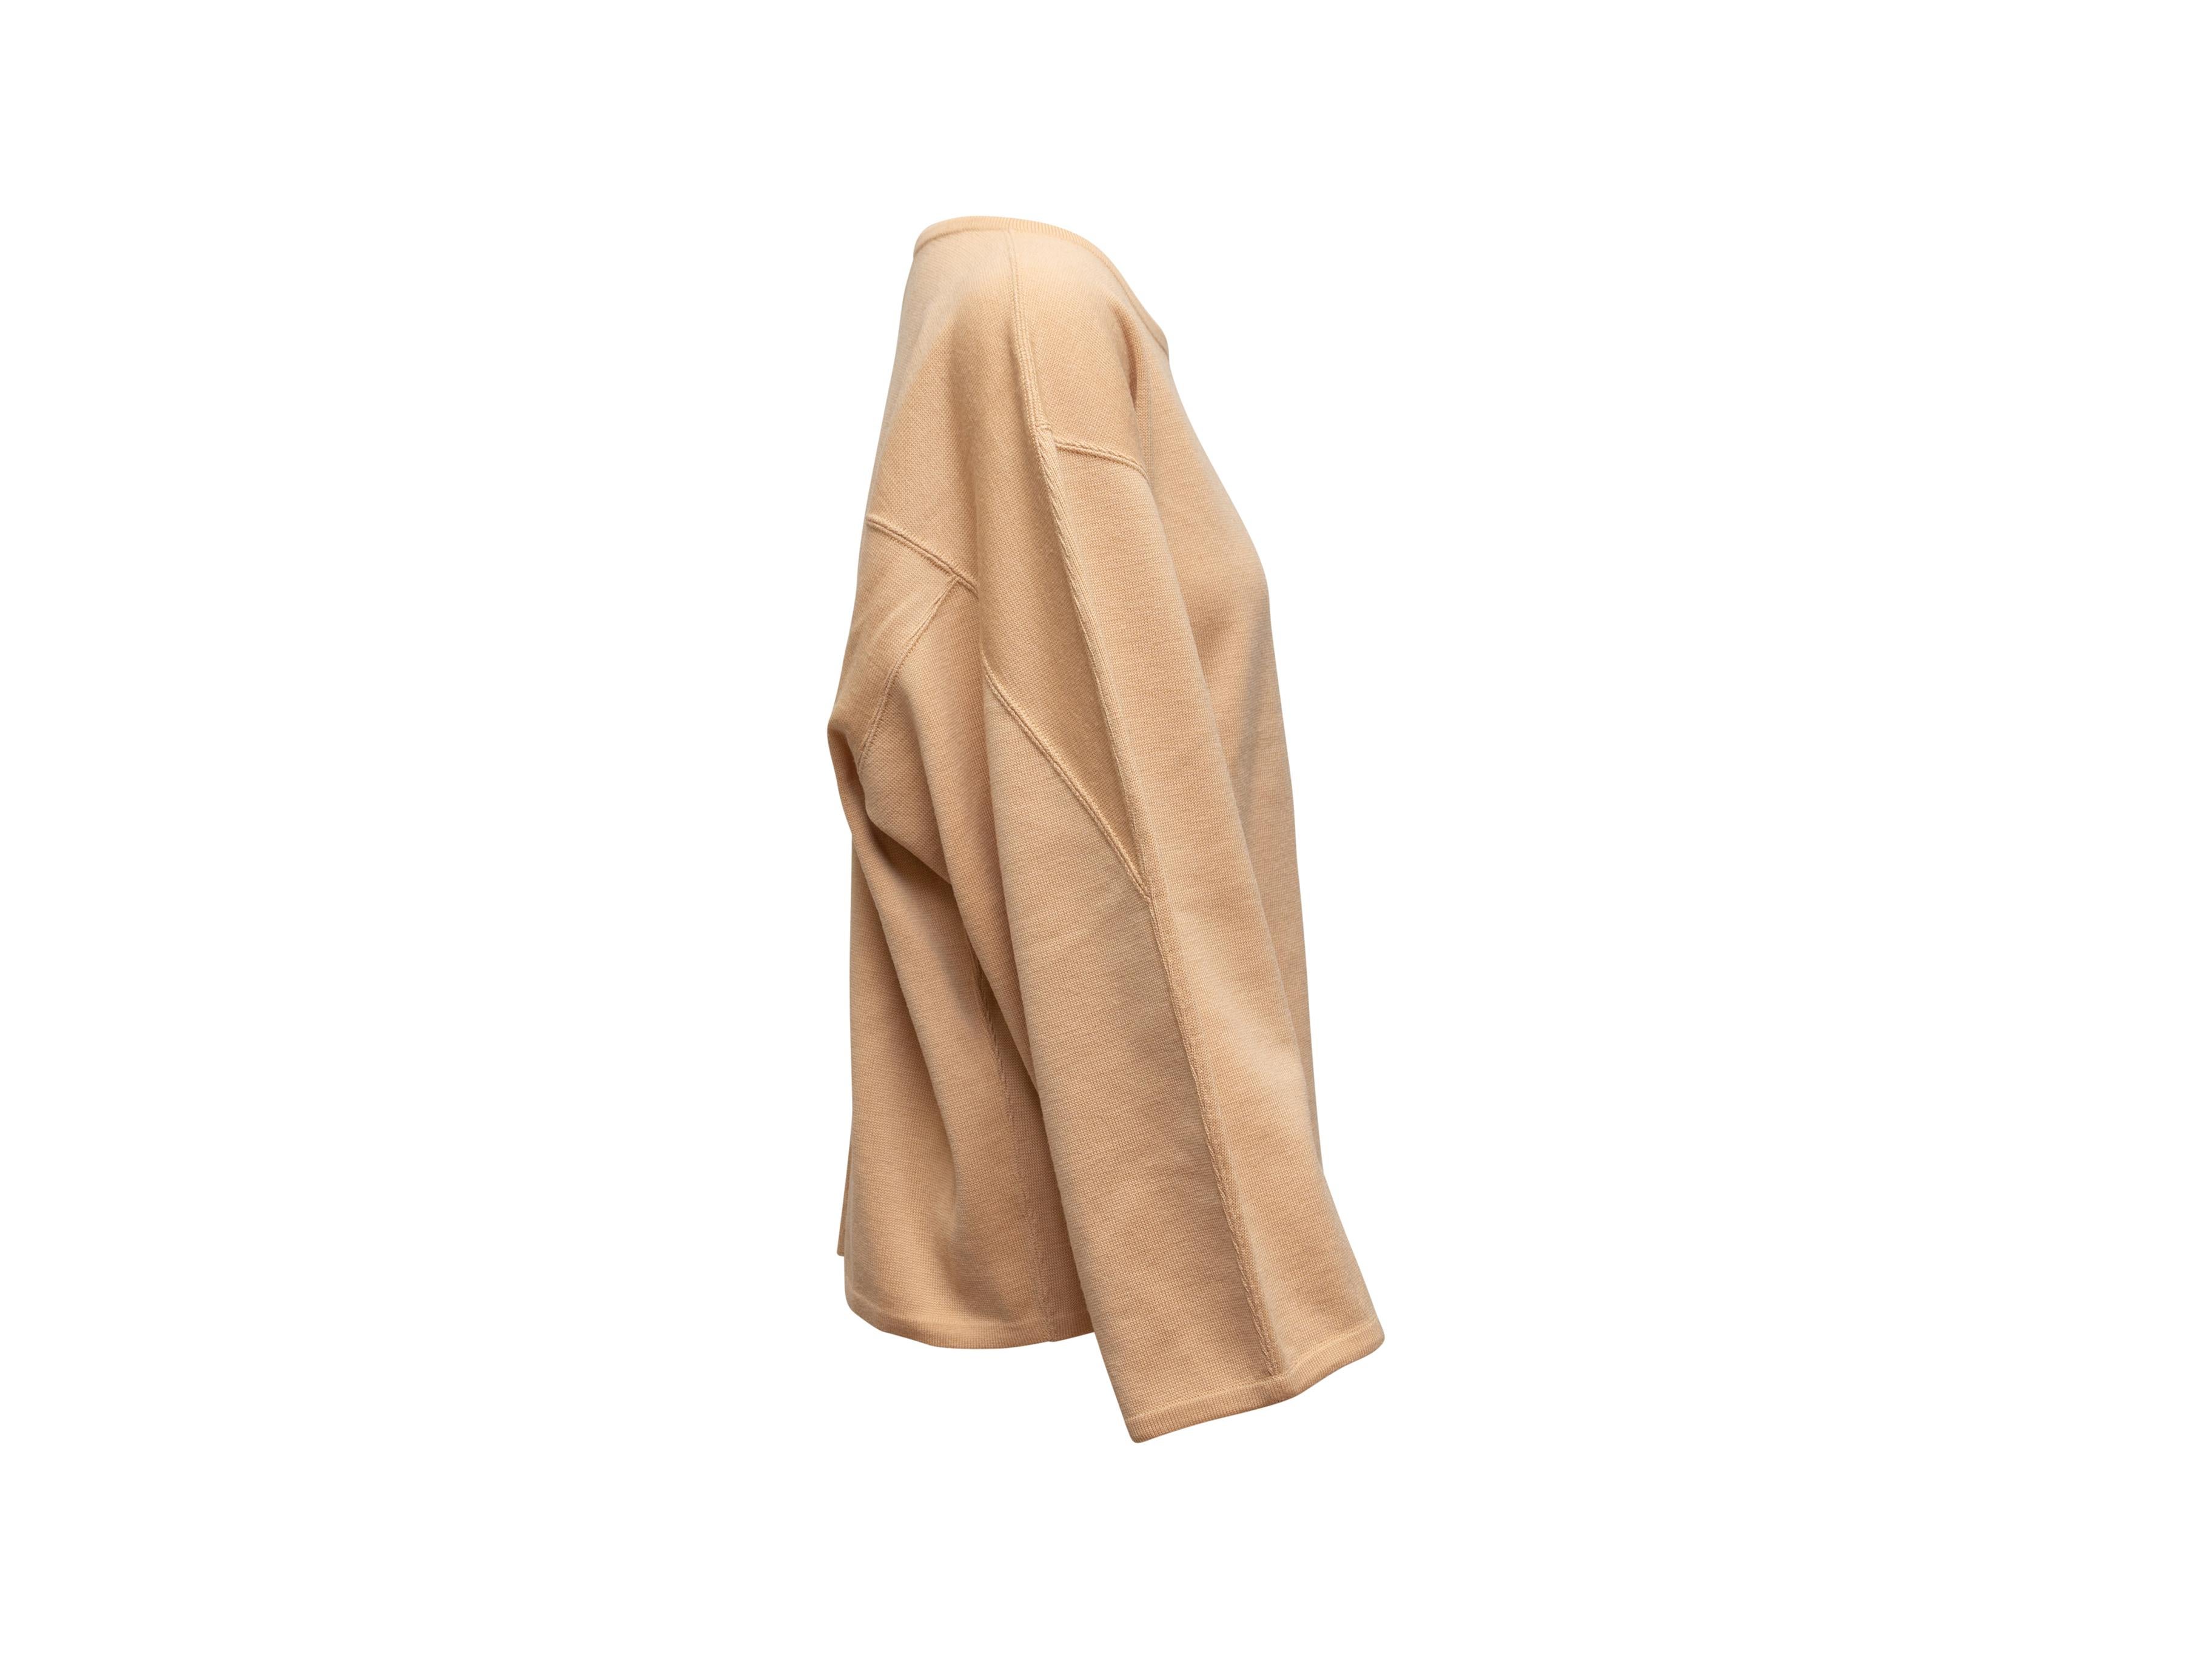 Product details: Vintage tan virgin wool sweater by Alaia. Crew neck. Wide long sleeves. 46